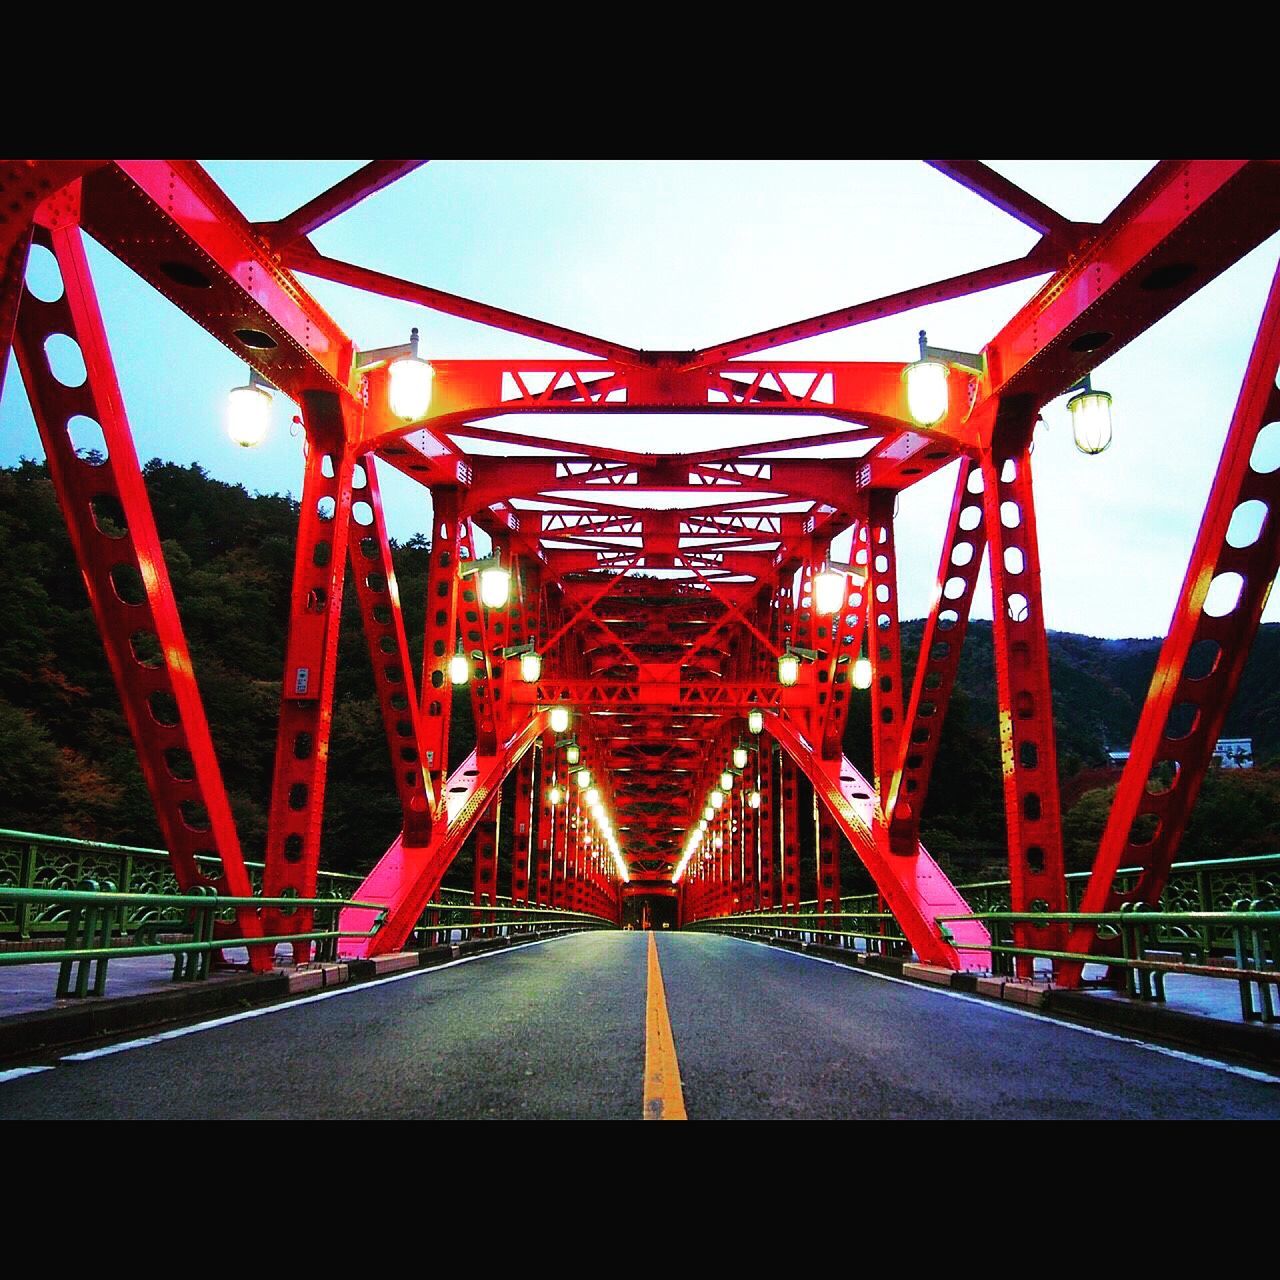 built structure, red, architecture, connection, bridge - man made structure, engineering, metal, clear sky, sky, low angle view, transportation, travel destinations, famous place, bridge, travel, metallic, illuminated, the way forward, outdoors, no people